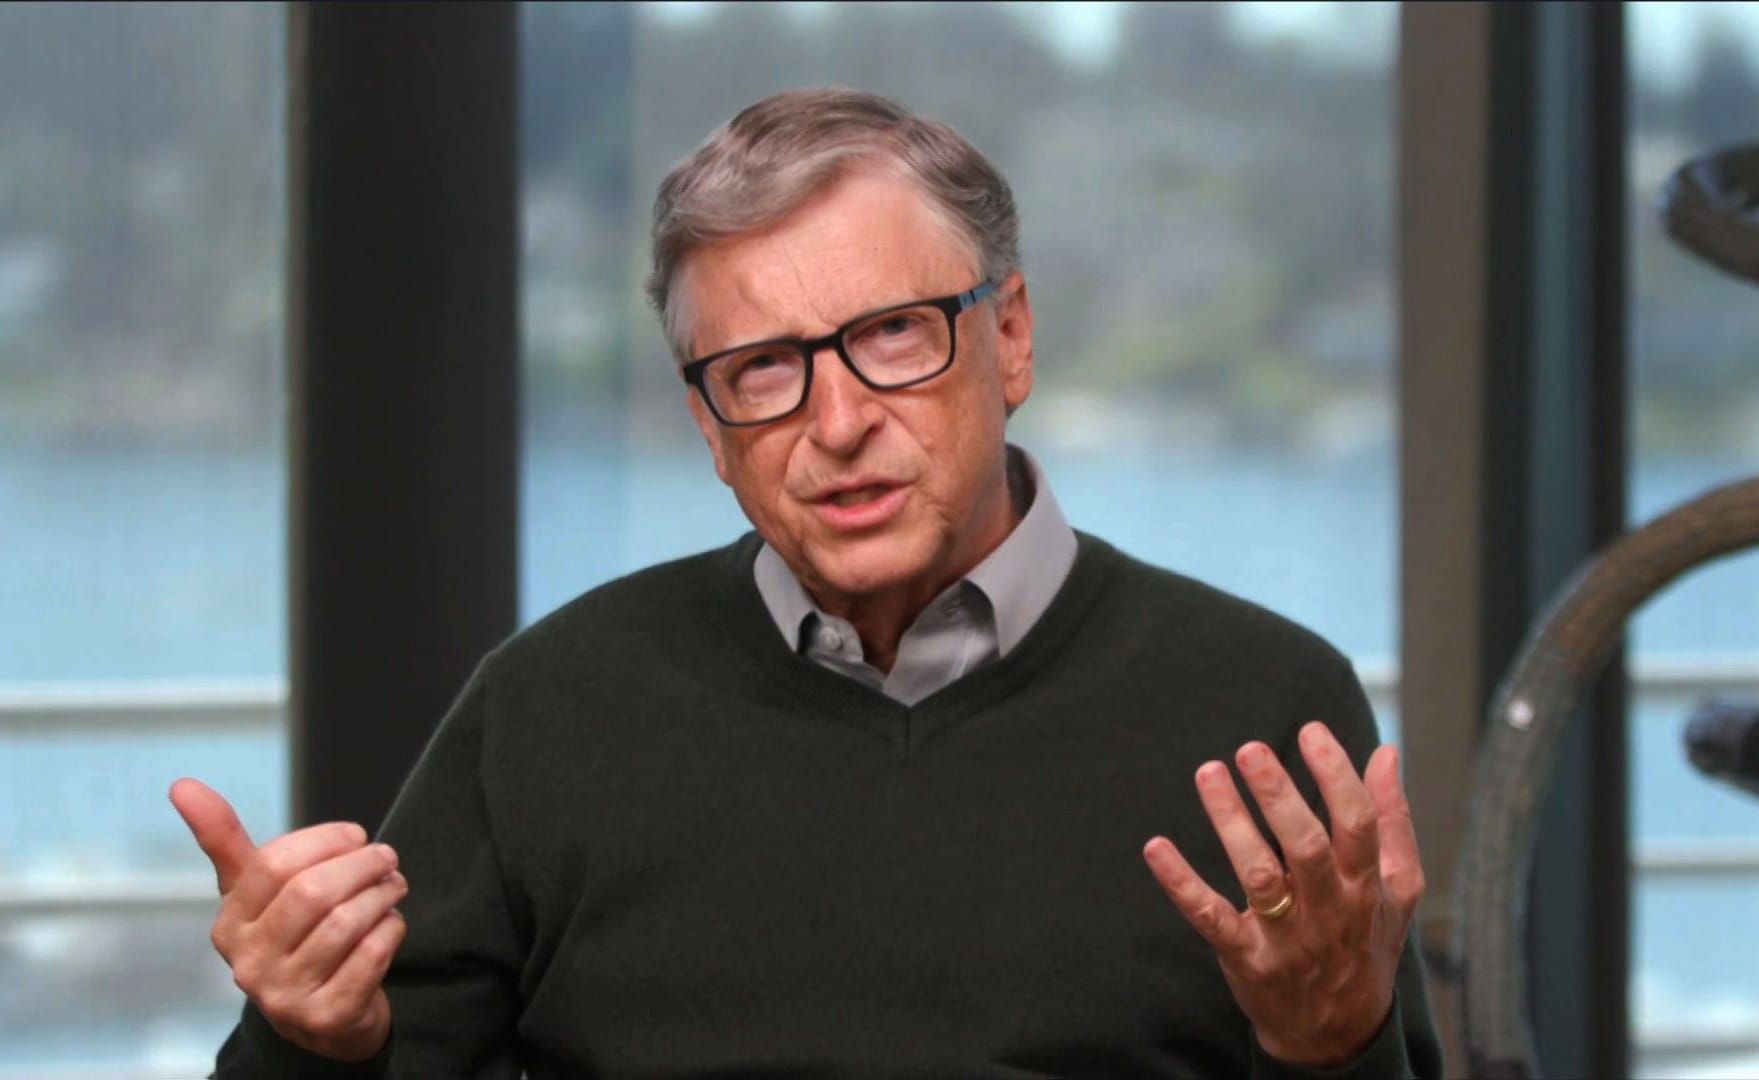 Watch Bill Gates share his thoughts on how to end to the Covid pandemic